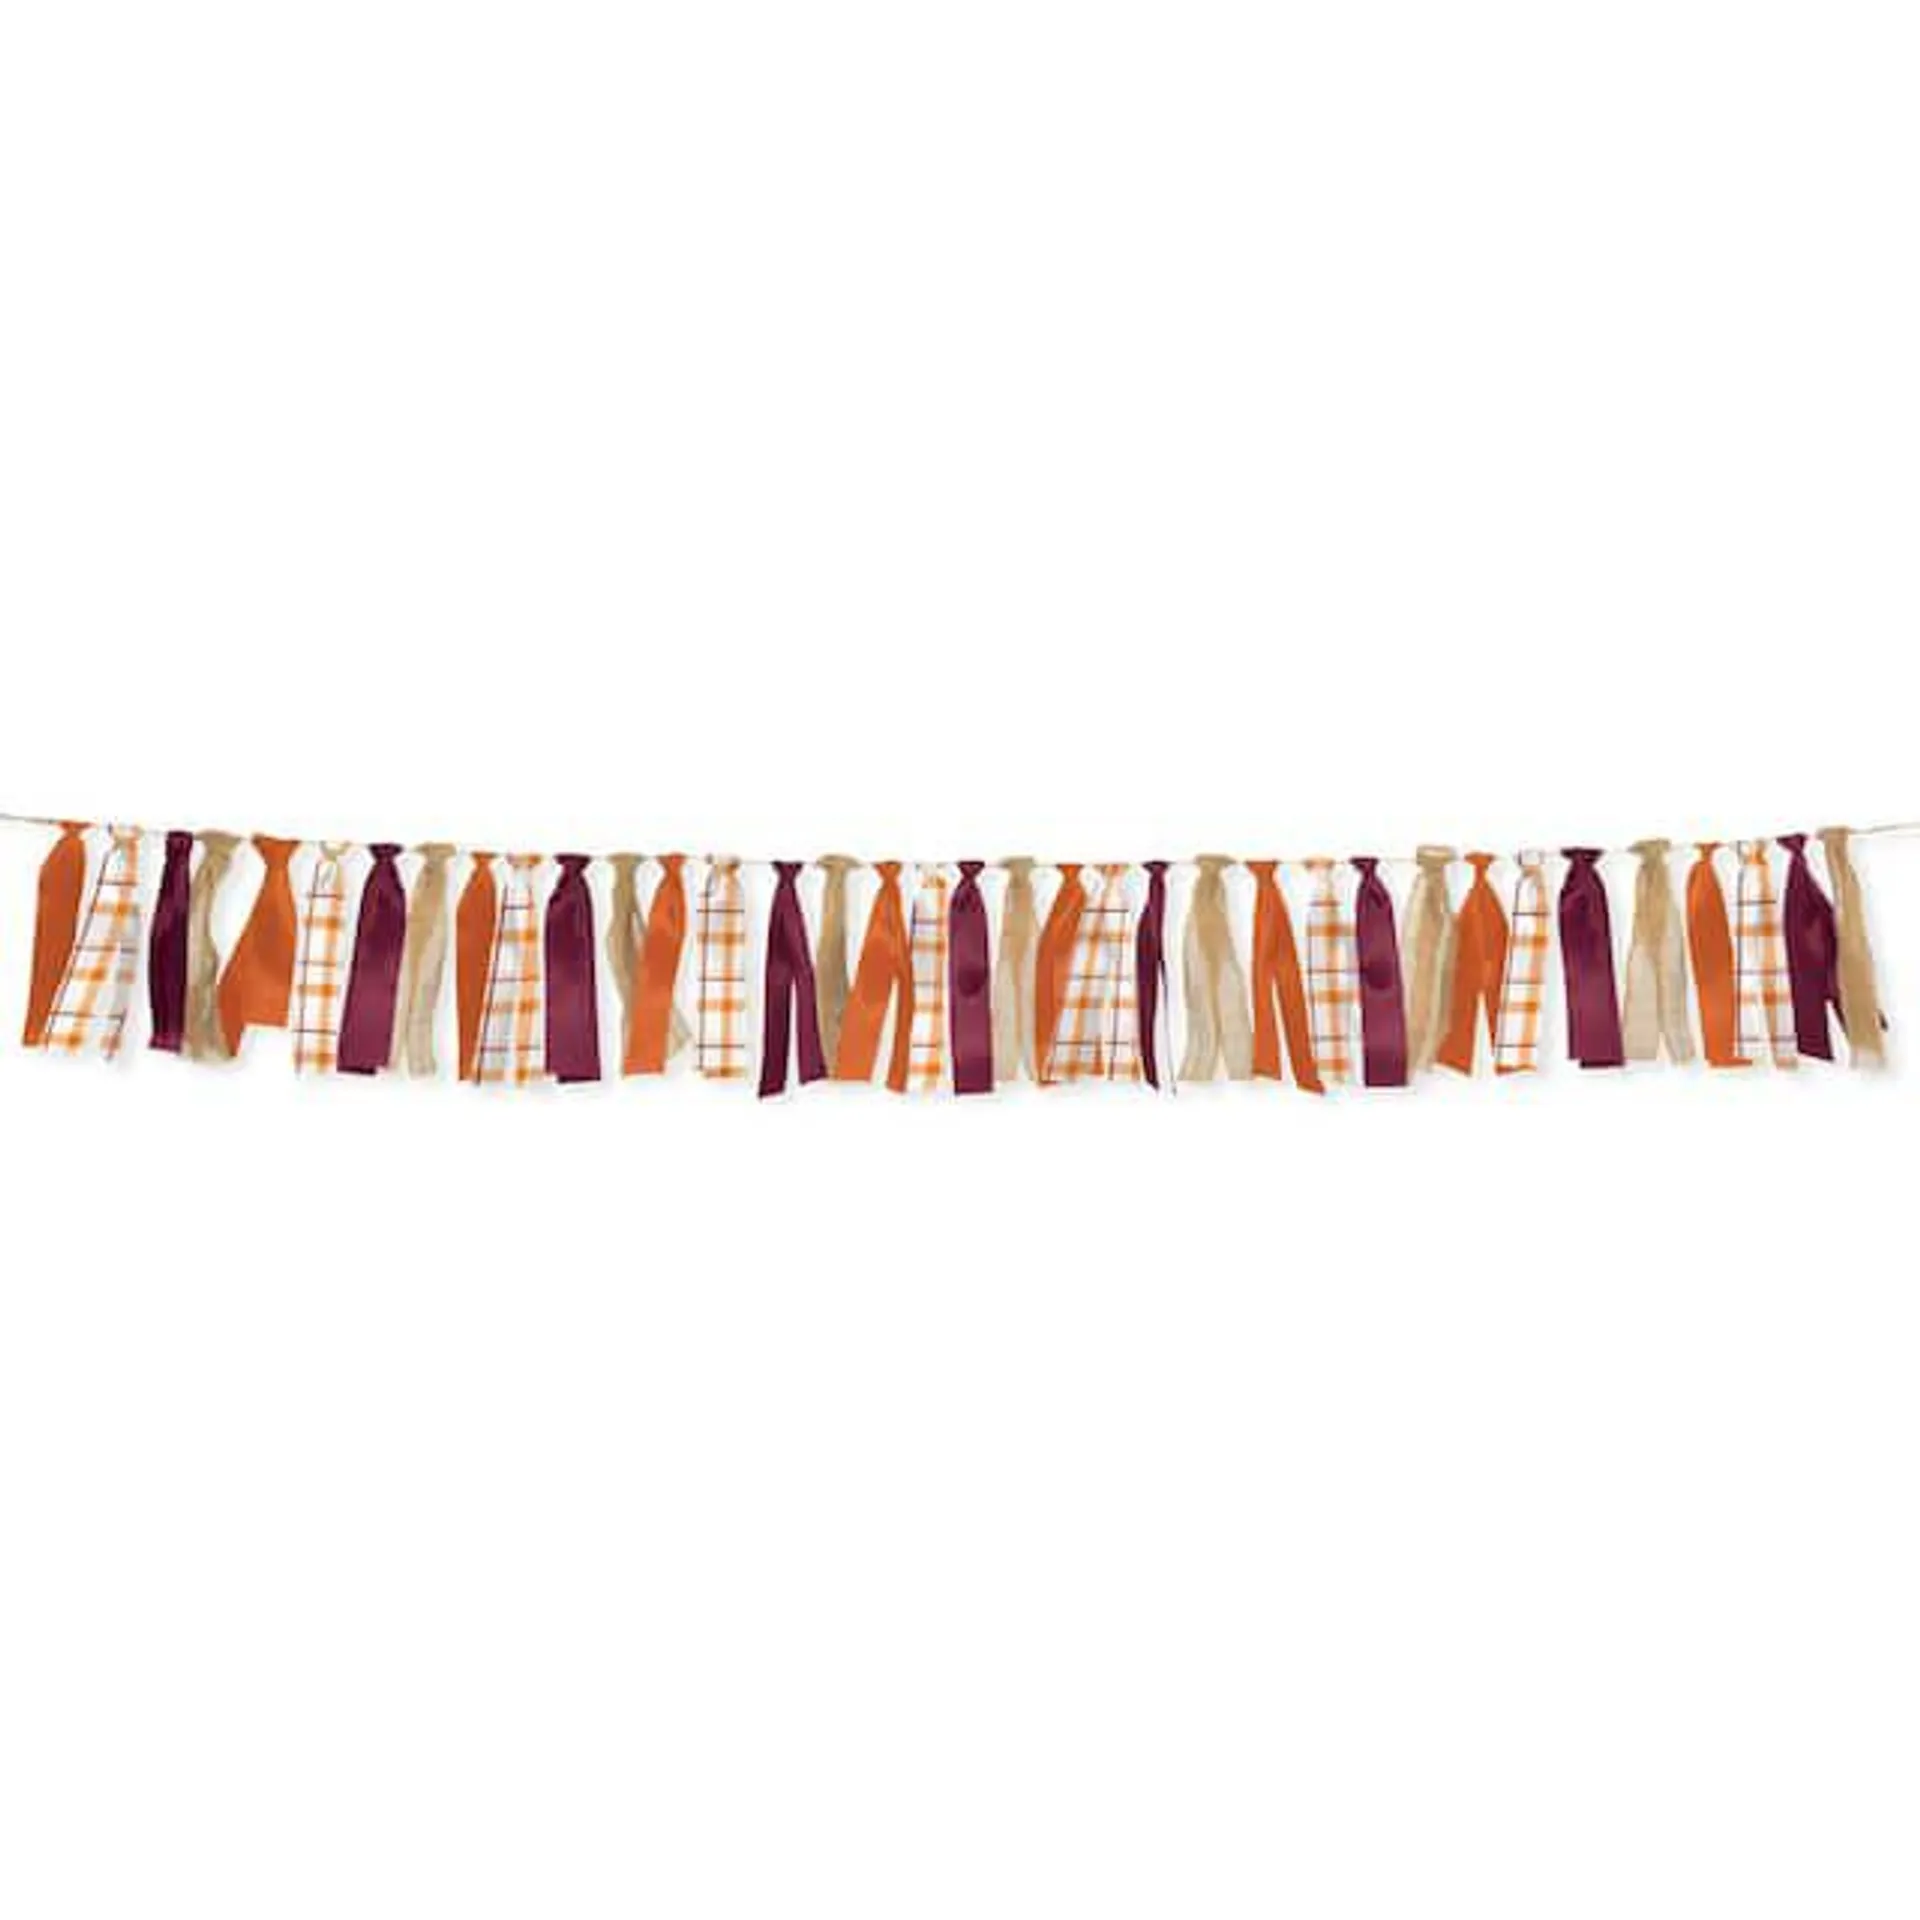 Fabric Ribbon Garland, Multi-Coloured Plaid, 12-in, Indoor Decoration for Fall